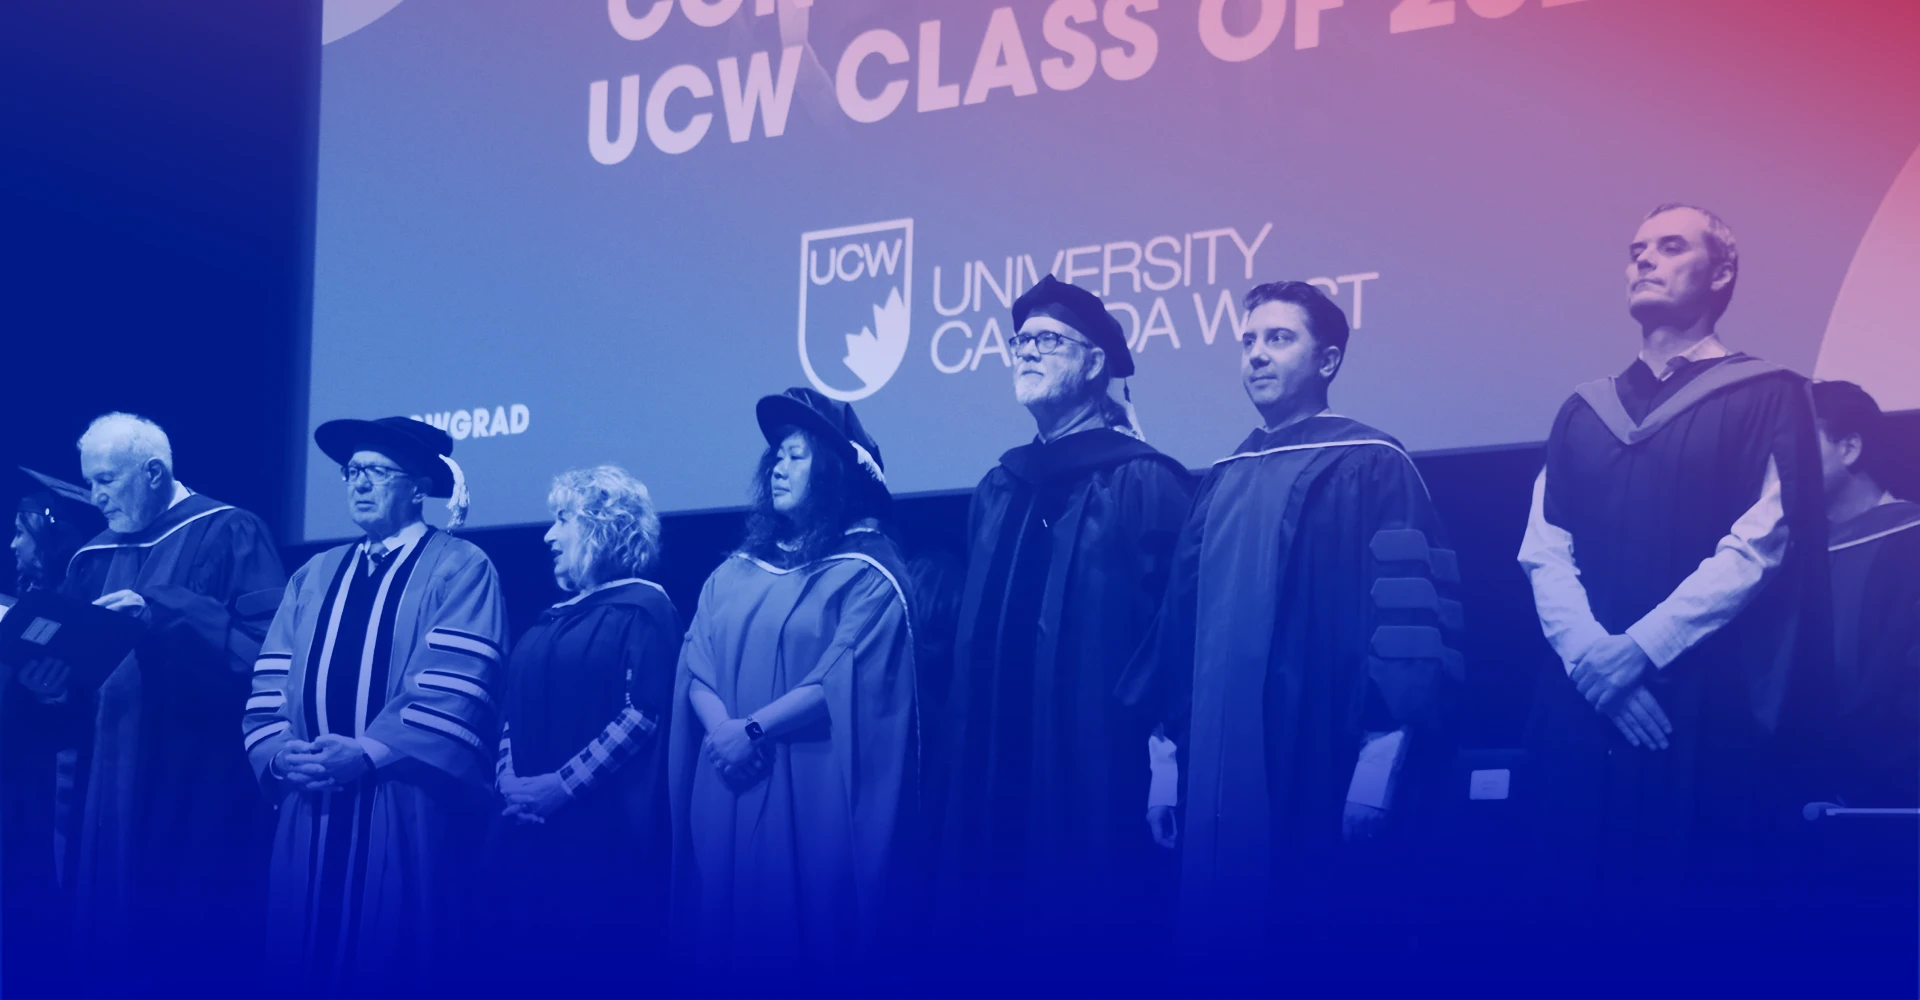  UCW graduates in the spotlight at Fall 2022 Convocation Ceremony